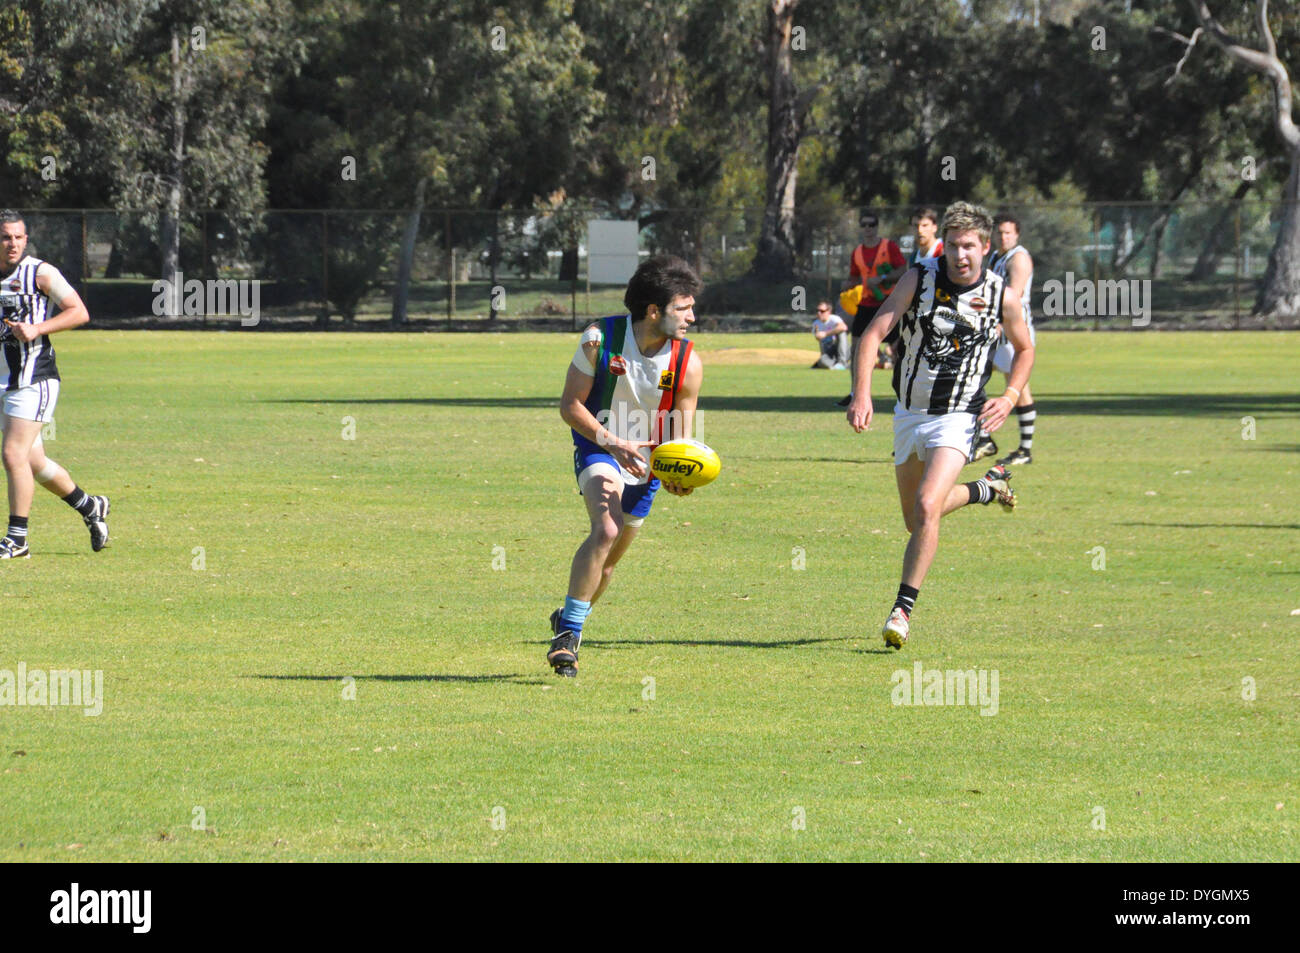 Australian Rules Football being played at amateurs level. Stock Photo